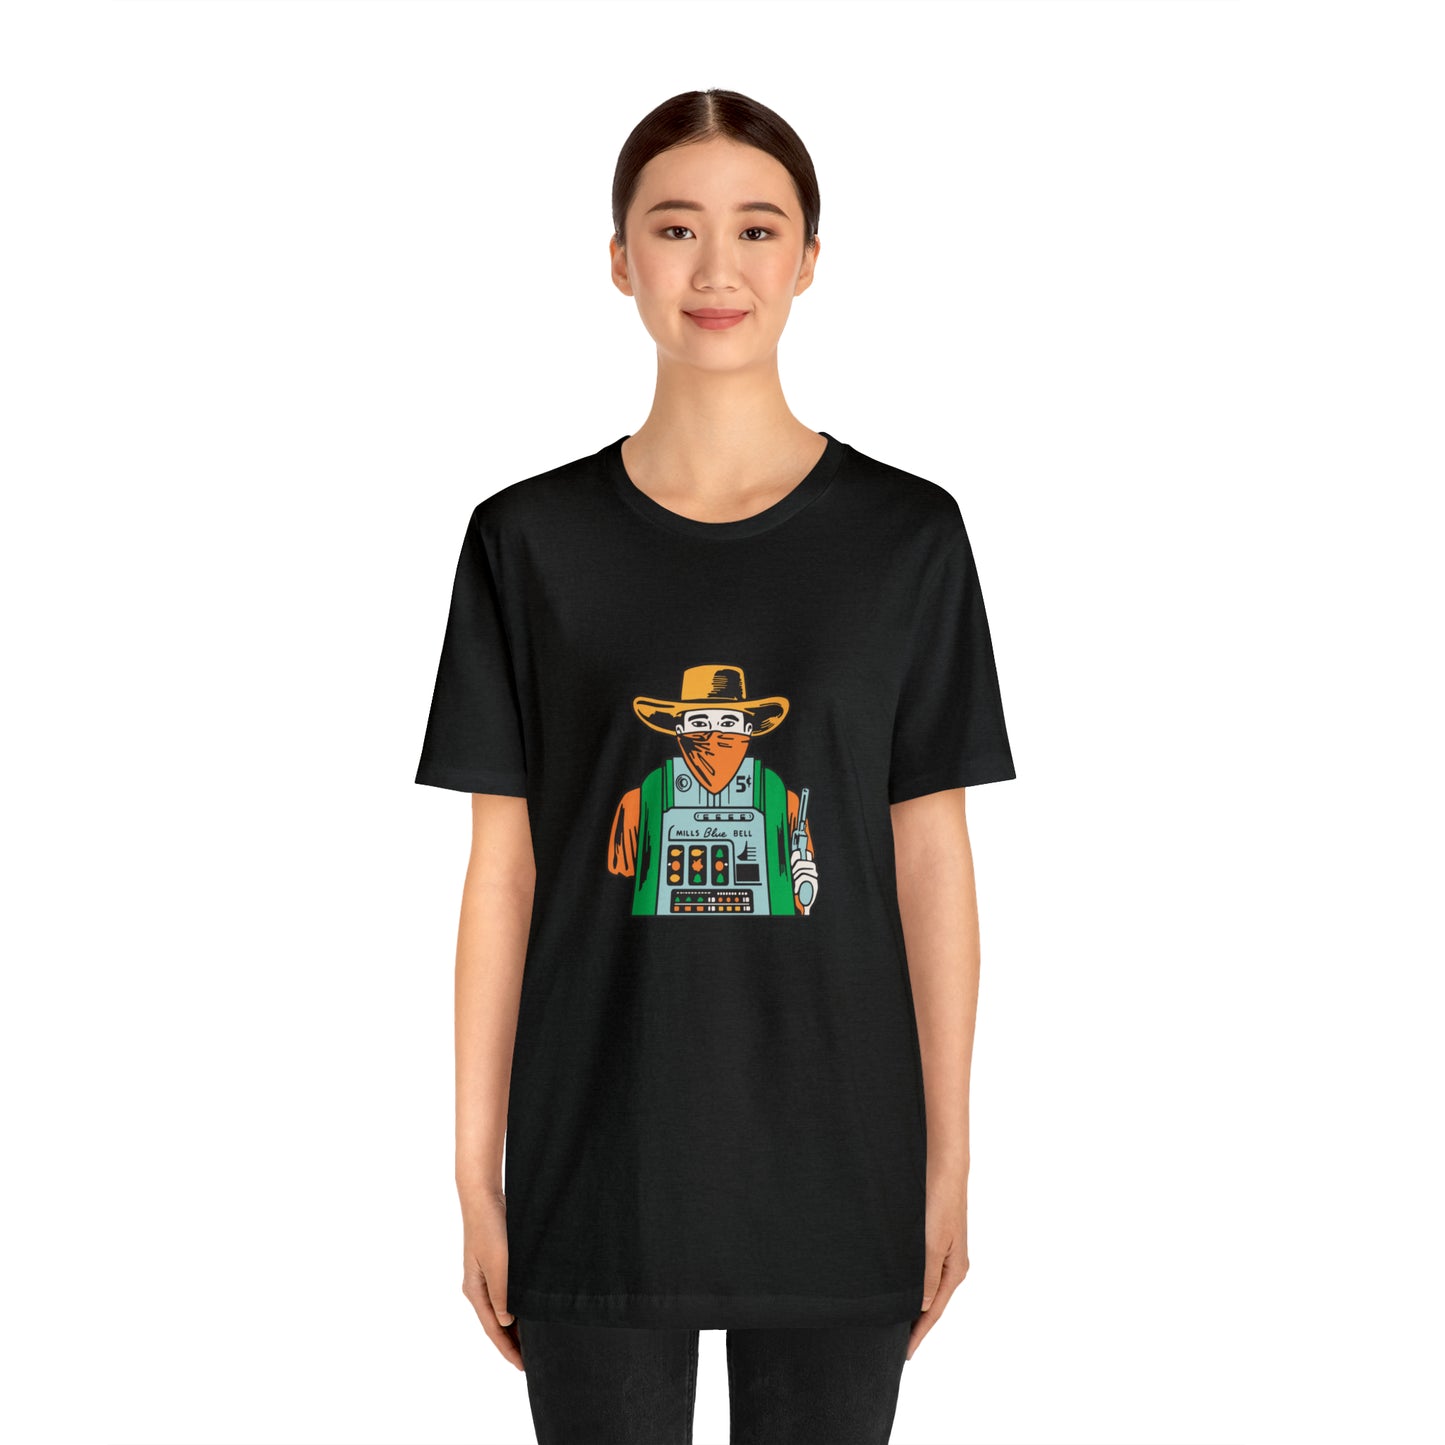 One Armed Bandit T-Shirt